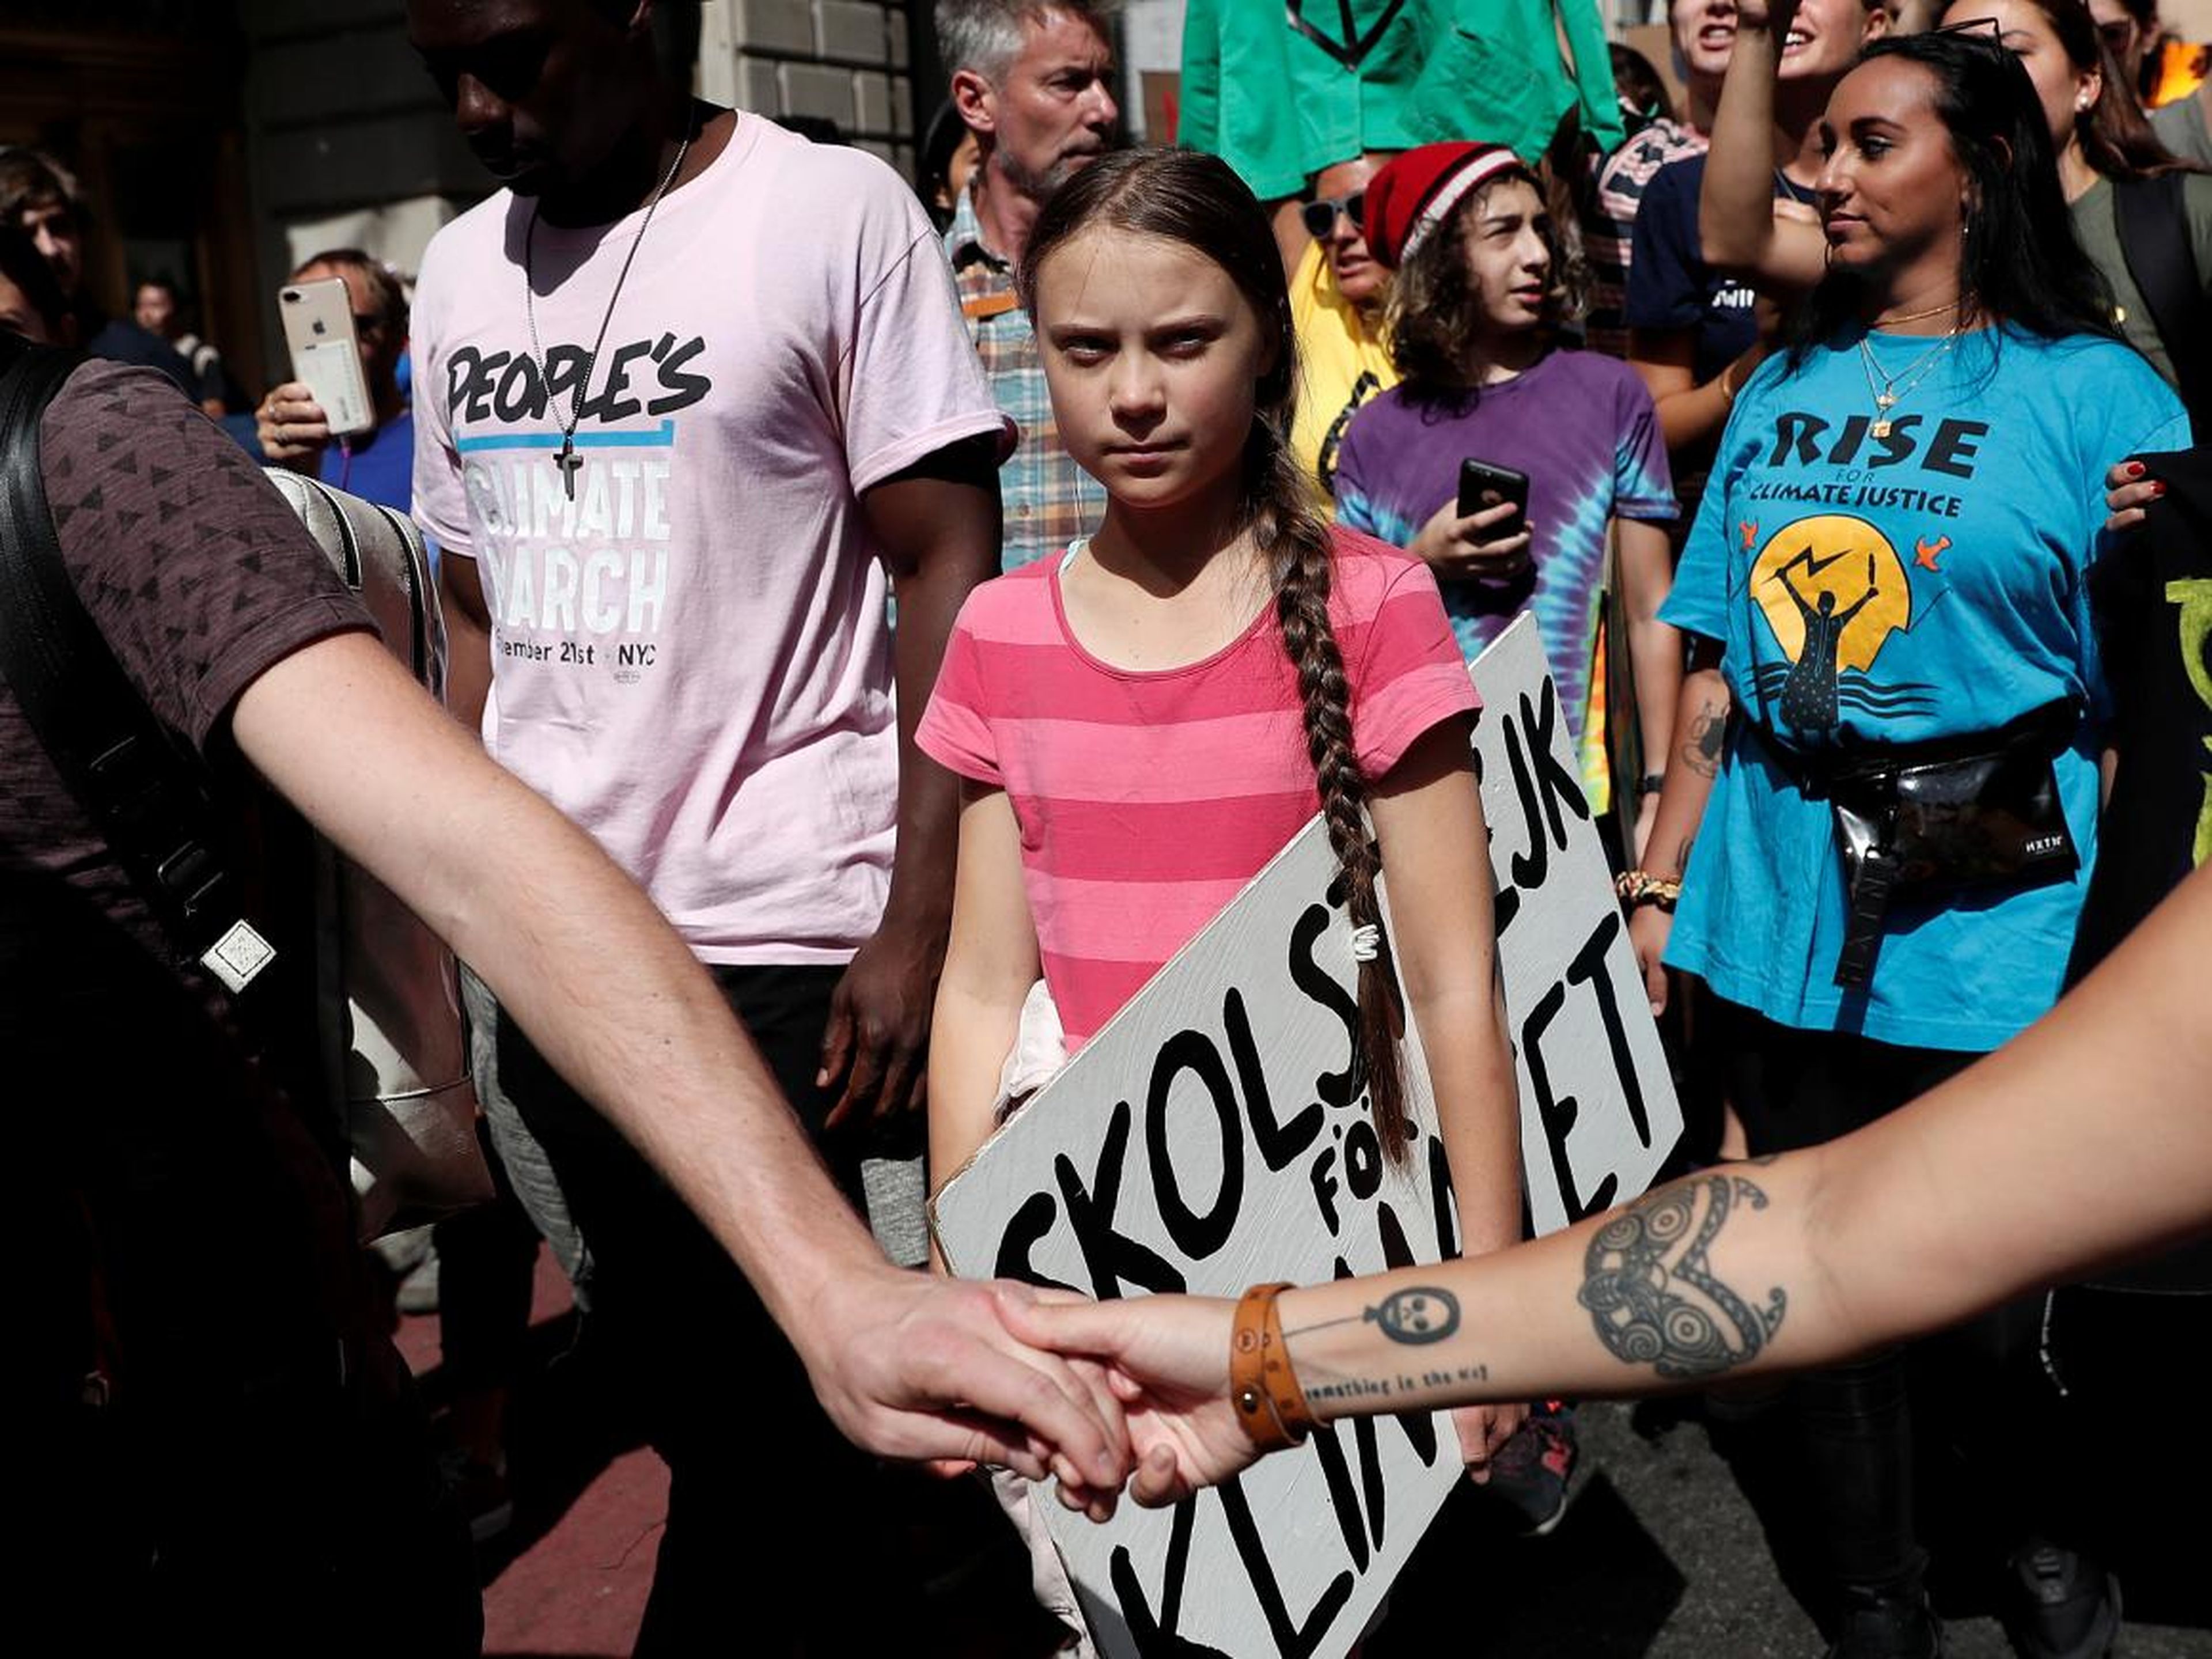 Greta Thunberg takes part in a demonstration as part of the Global Climate Strike in New York.